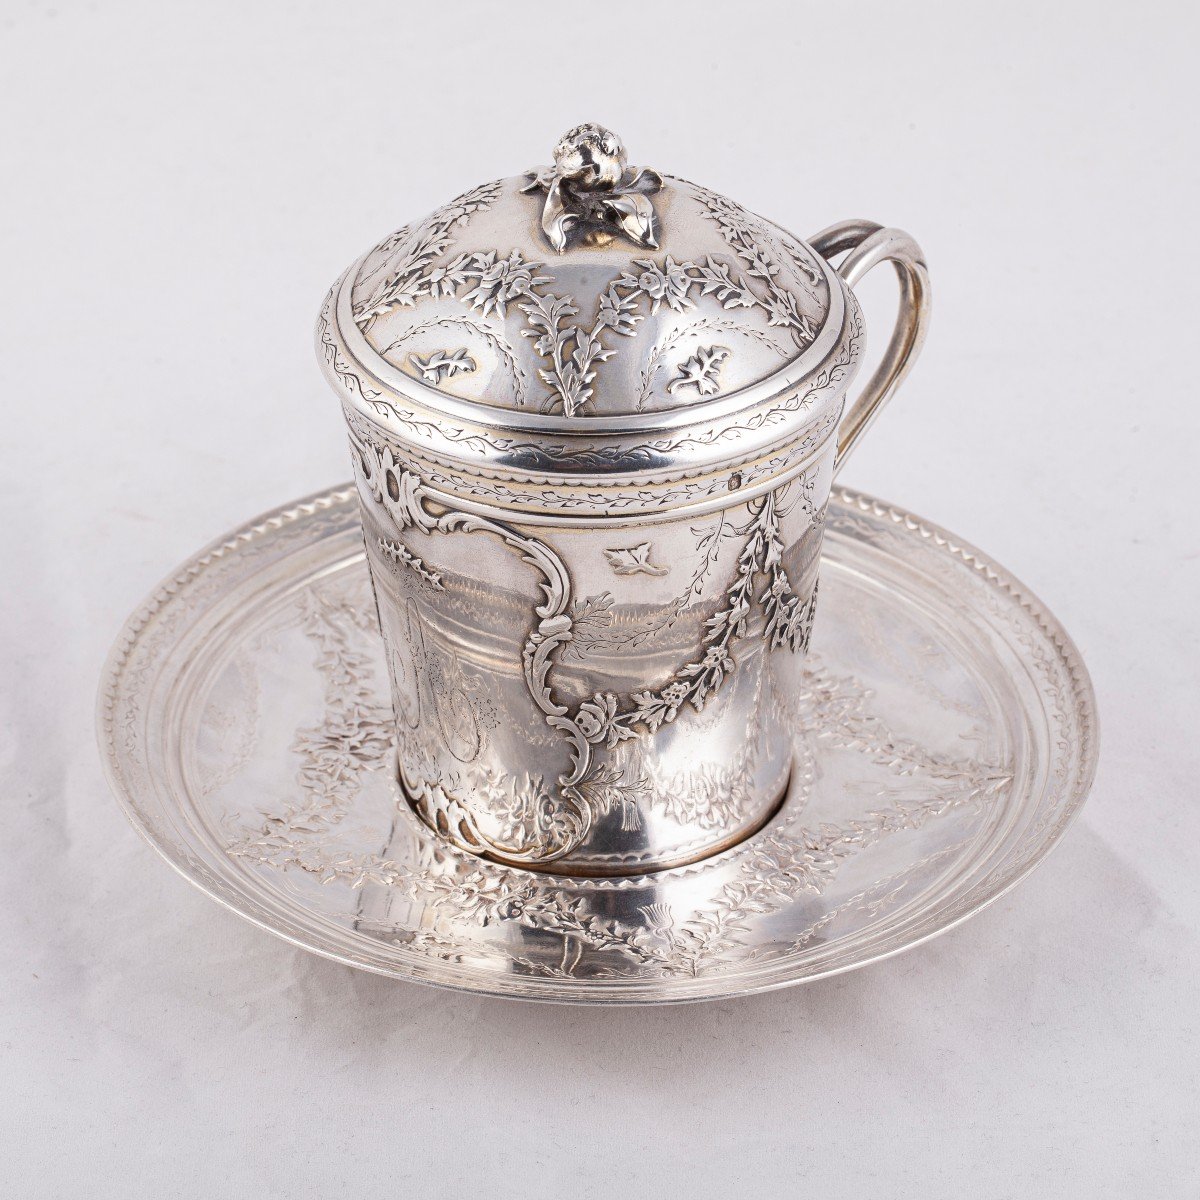 French Silver Cup On A Saucer, 18th Century